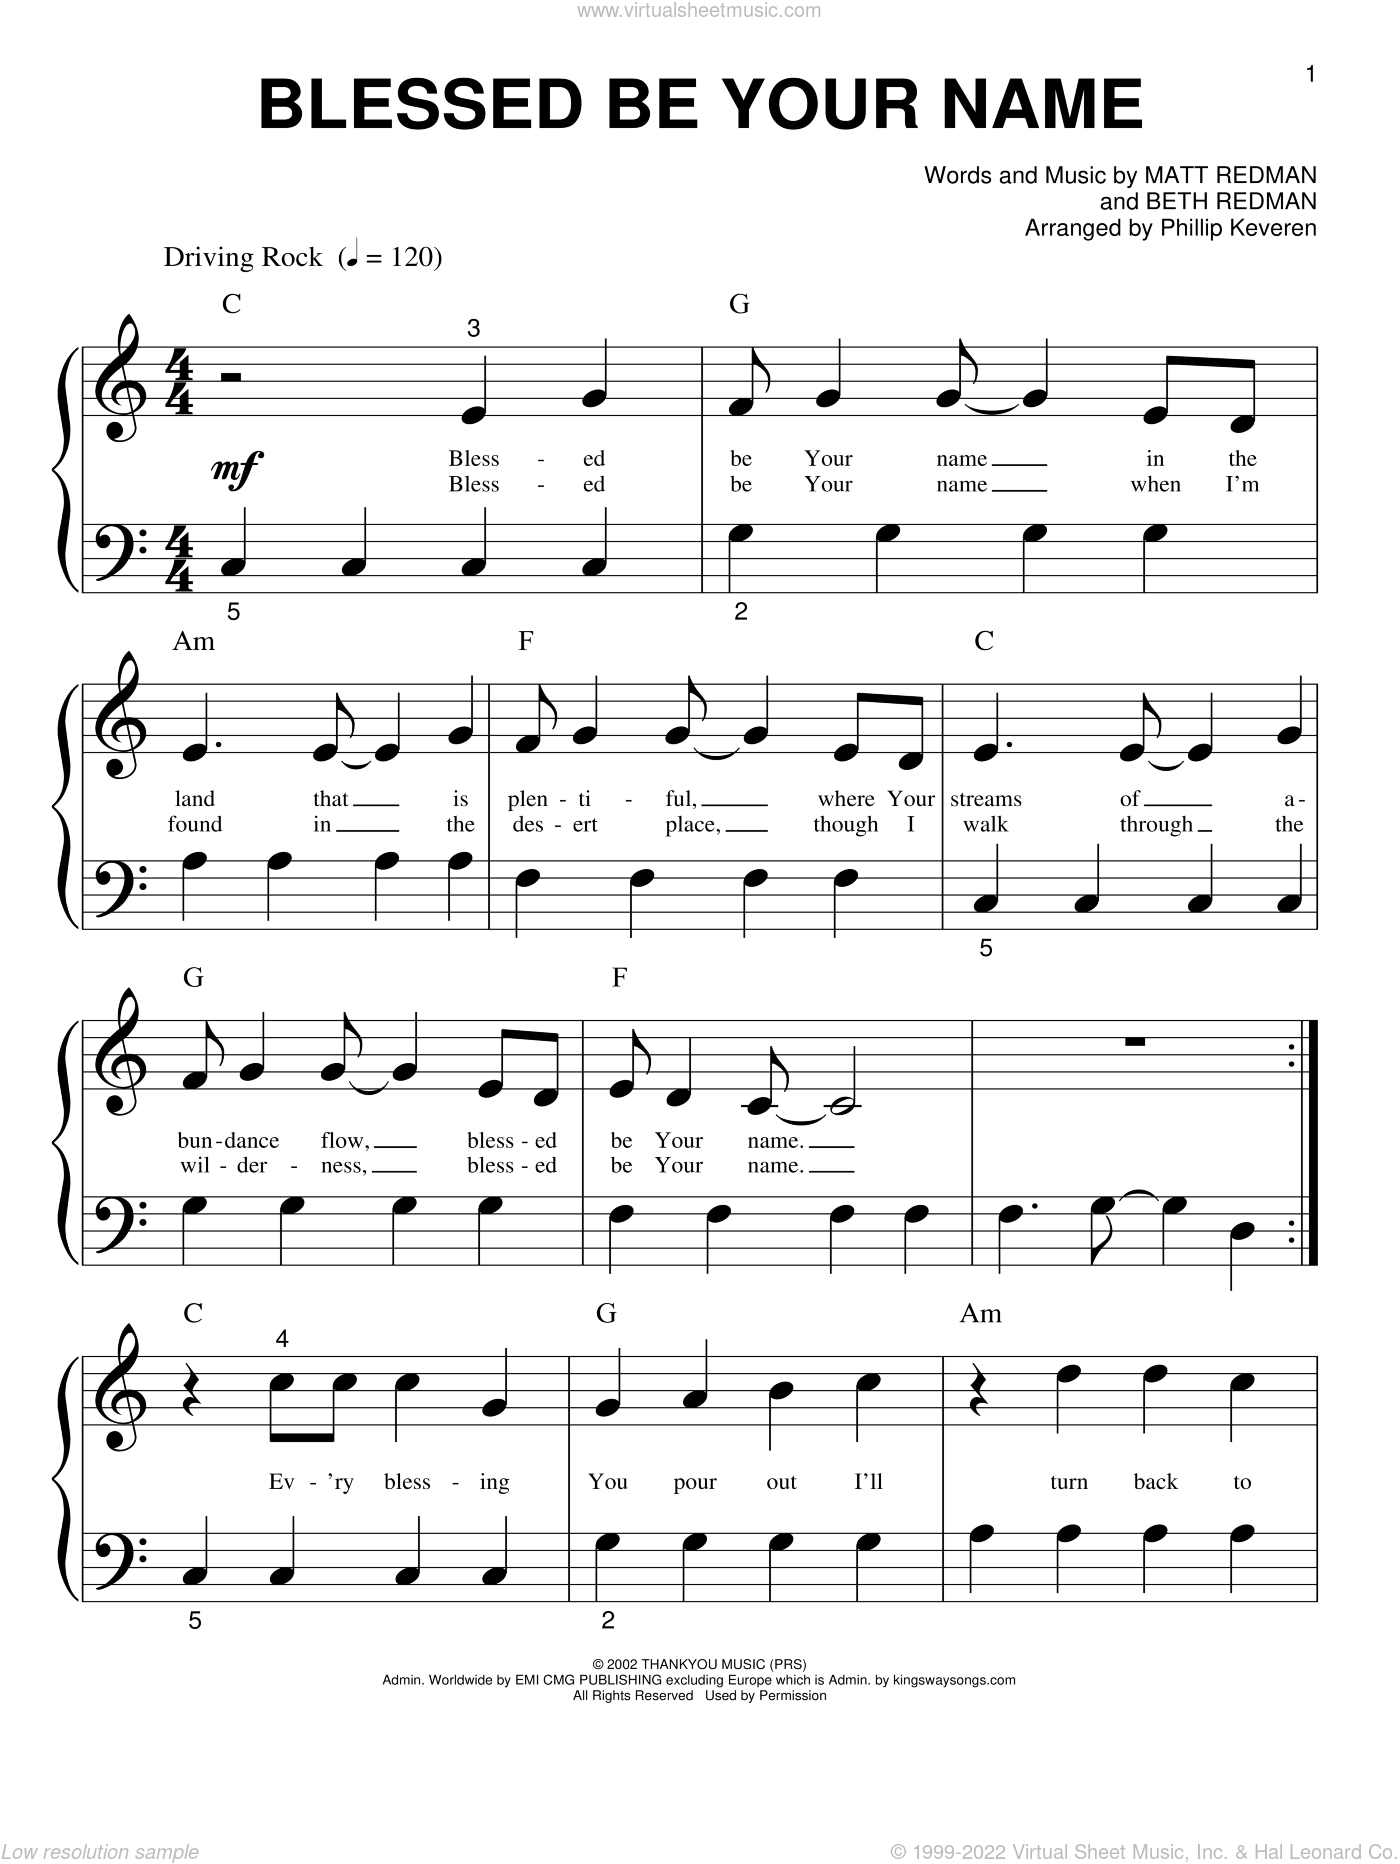 Redman - Blessed Be Your Name sheet music for piano solo ...